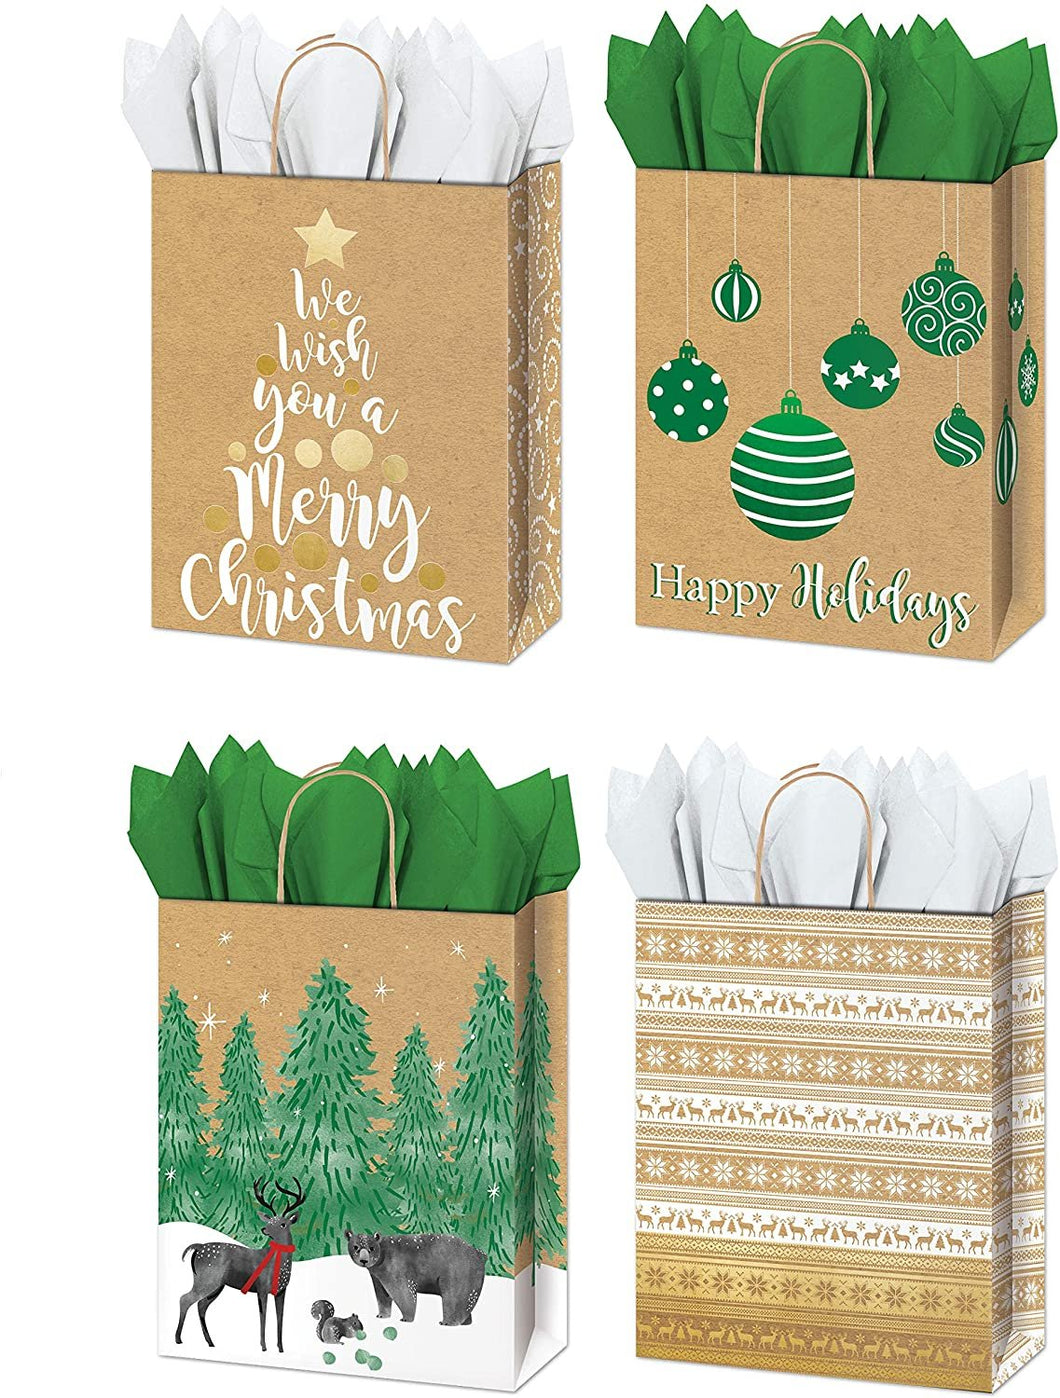 B-THERE Bundle 4ct Christmas Holiday Medium Kraft Gift Bags, Foil Finish of Reindeer, Snowflakes, Ornaments, and Trees